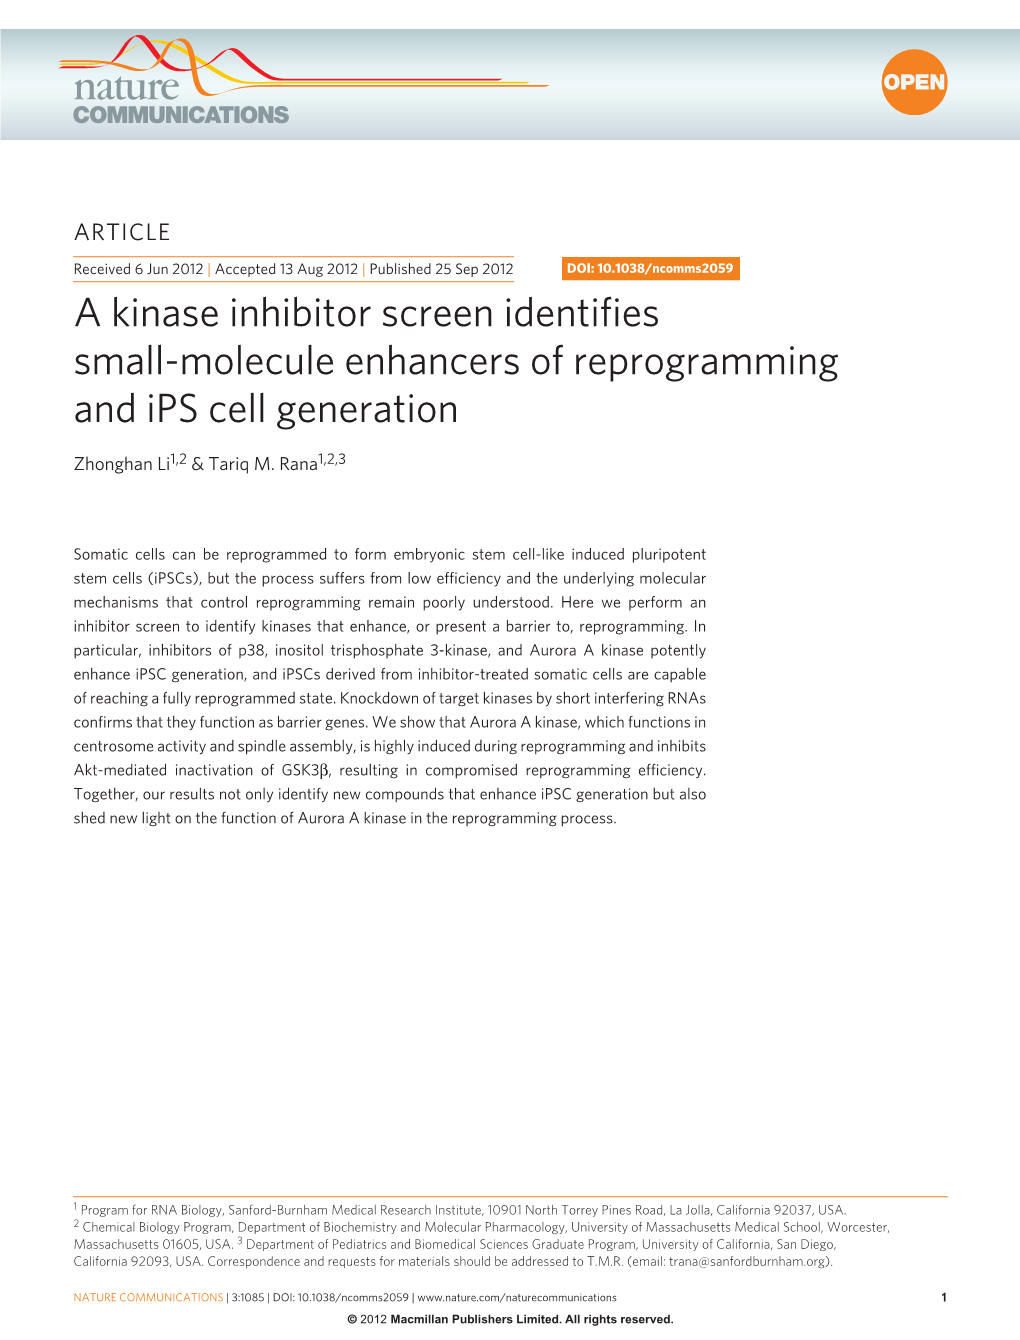 A Kinase Inhibitor Screen Identifies Small-Molecule Enhancers of Reprogramming and Ips Cell Generation